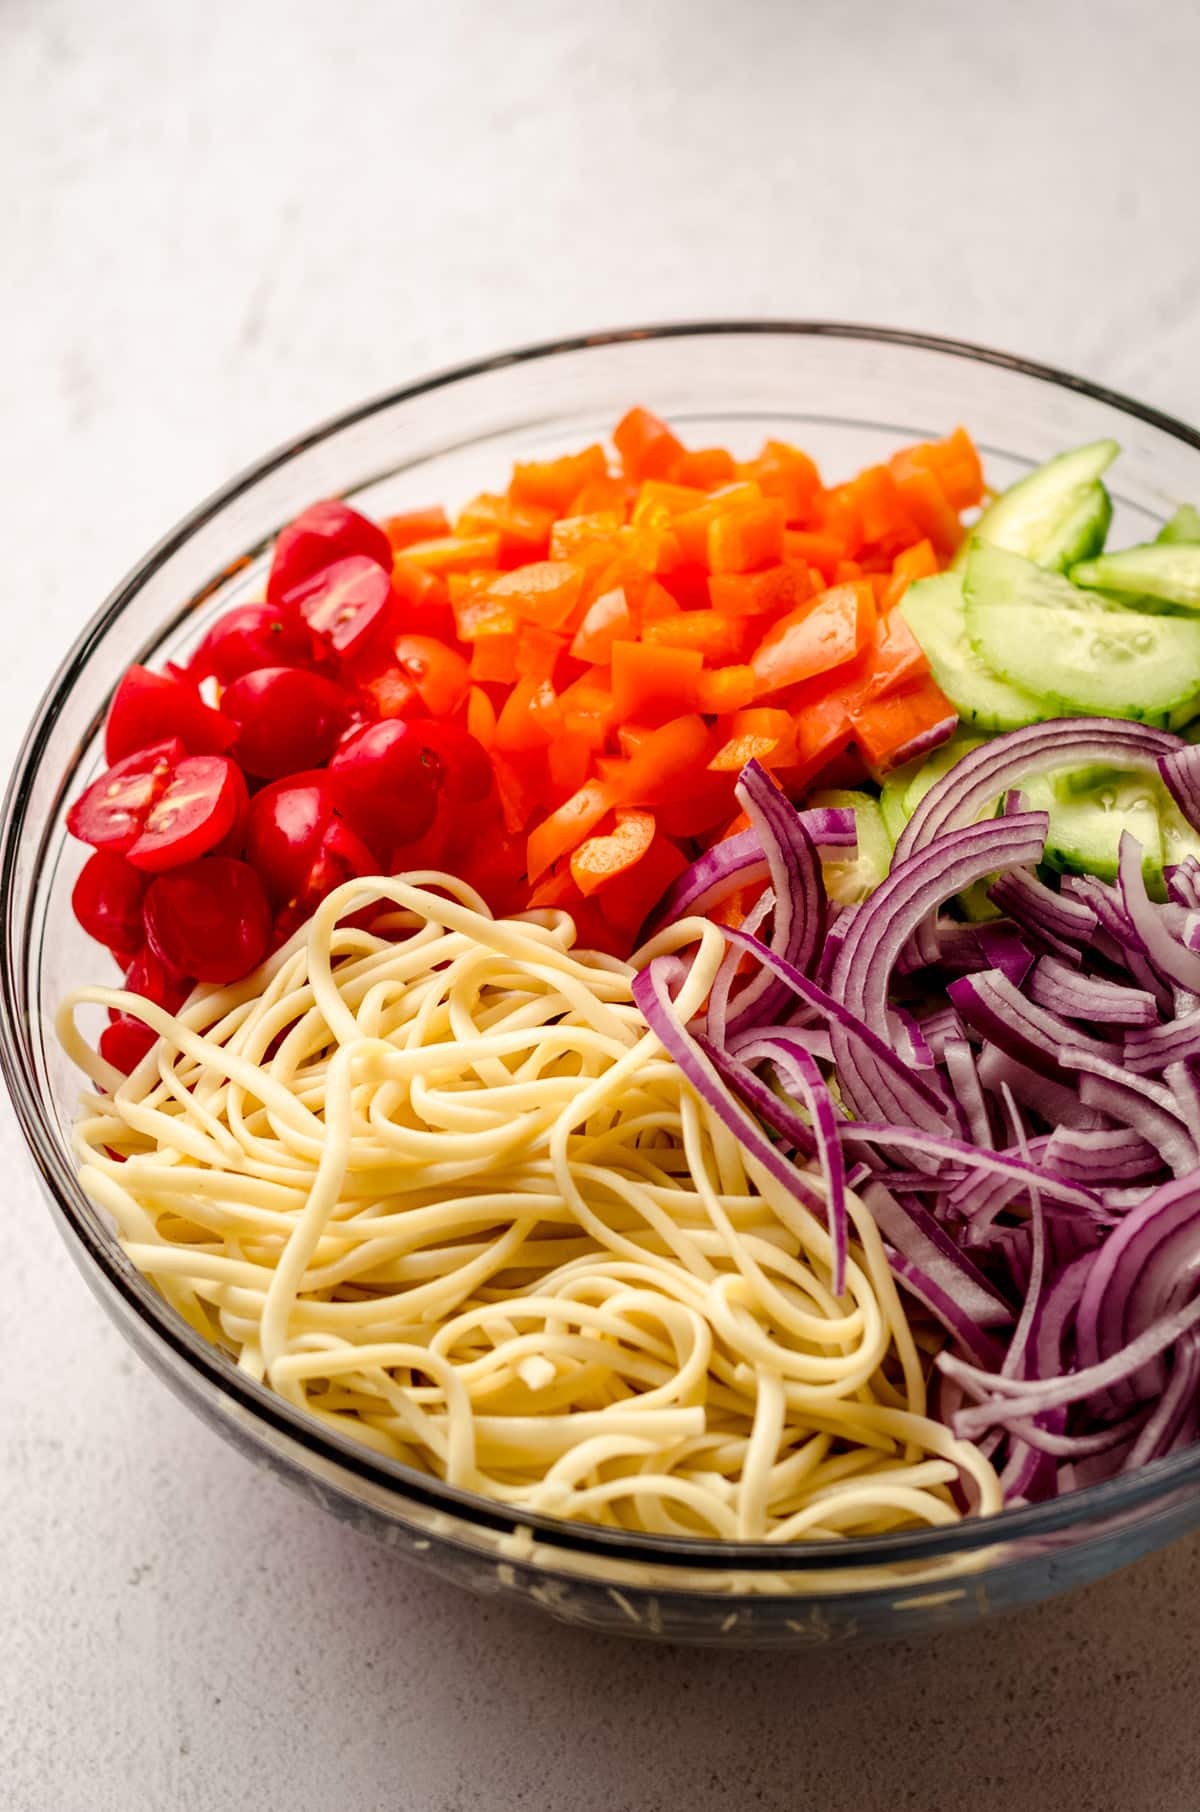 The ingredients needed to make spaghetti salad, all in a large bowl: spaghetti noodles, onion, cucumber, carrot, and bell pepper.